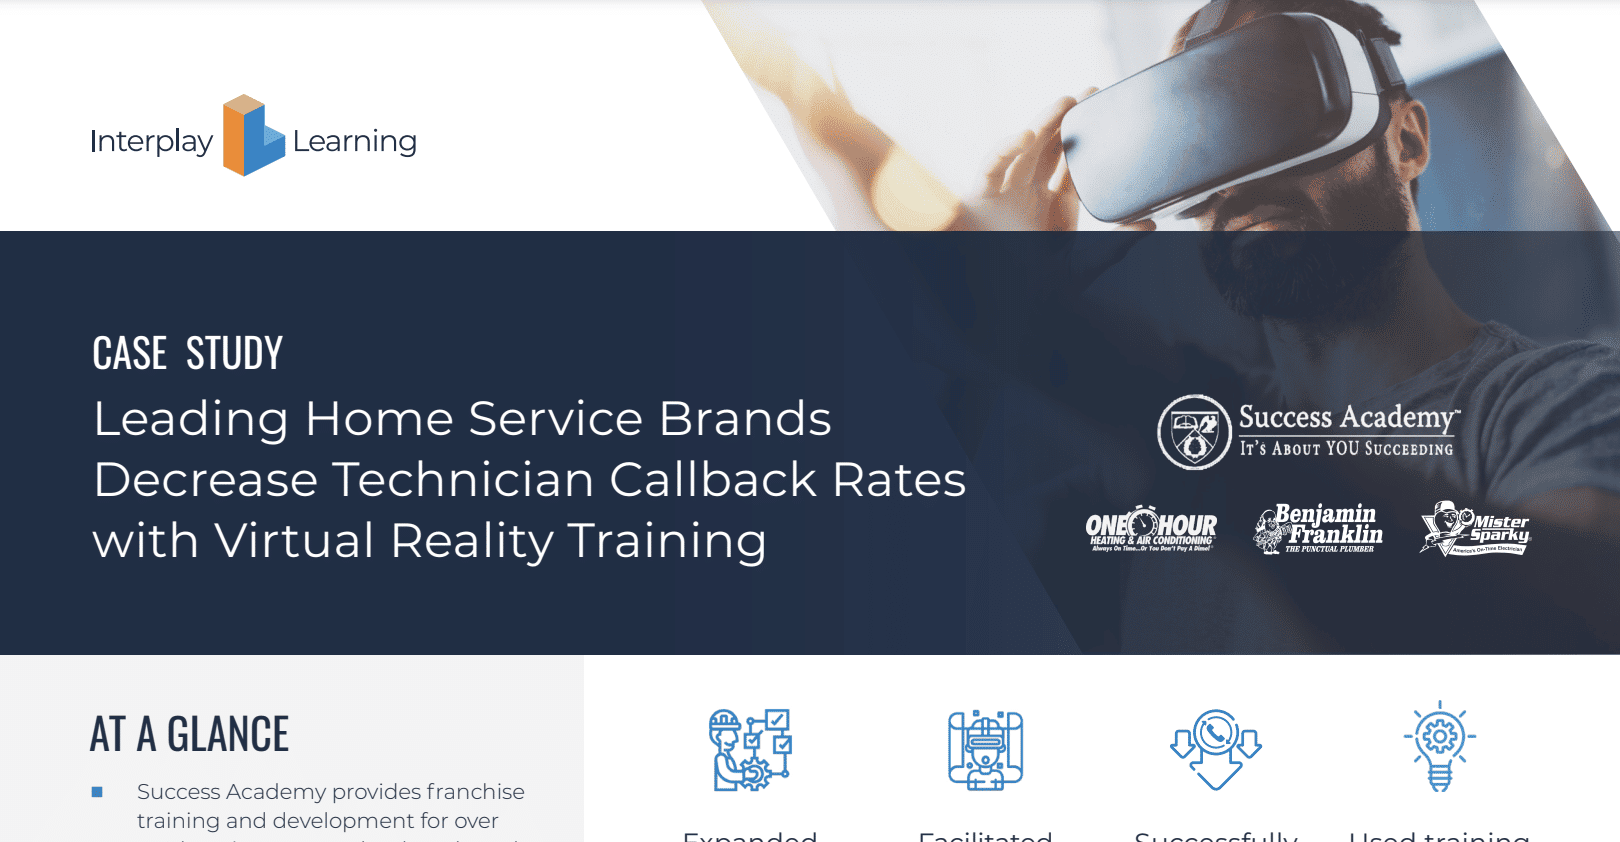 A snapshot of a case study discussing descreasing technician callback rates with virtual reality training for hom service brands